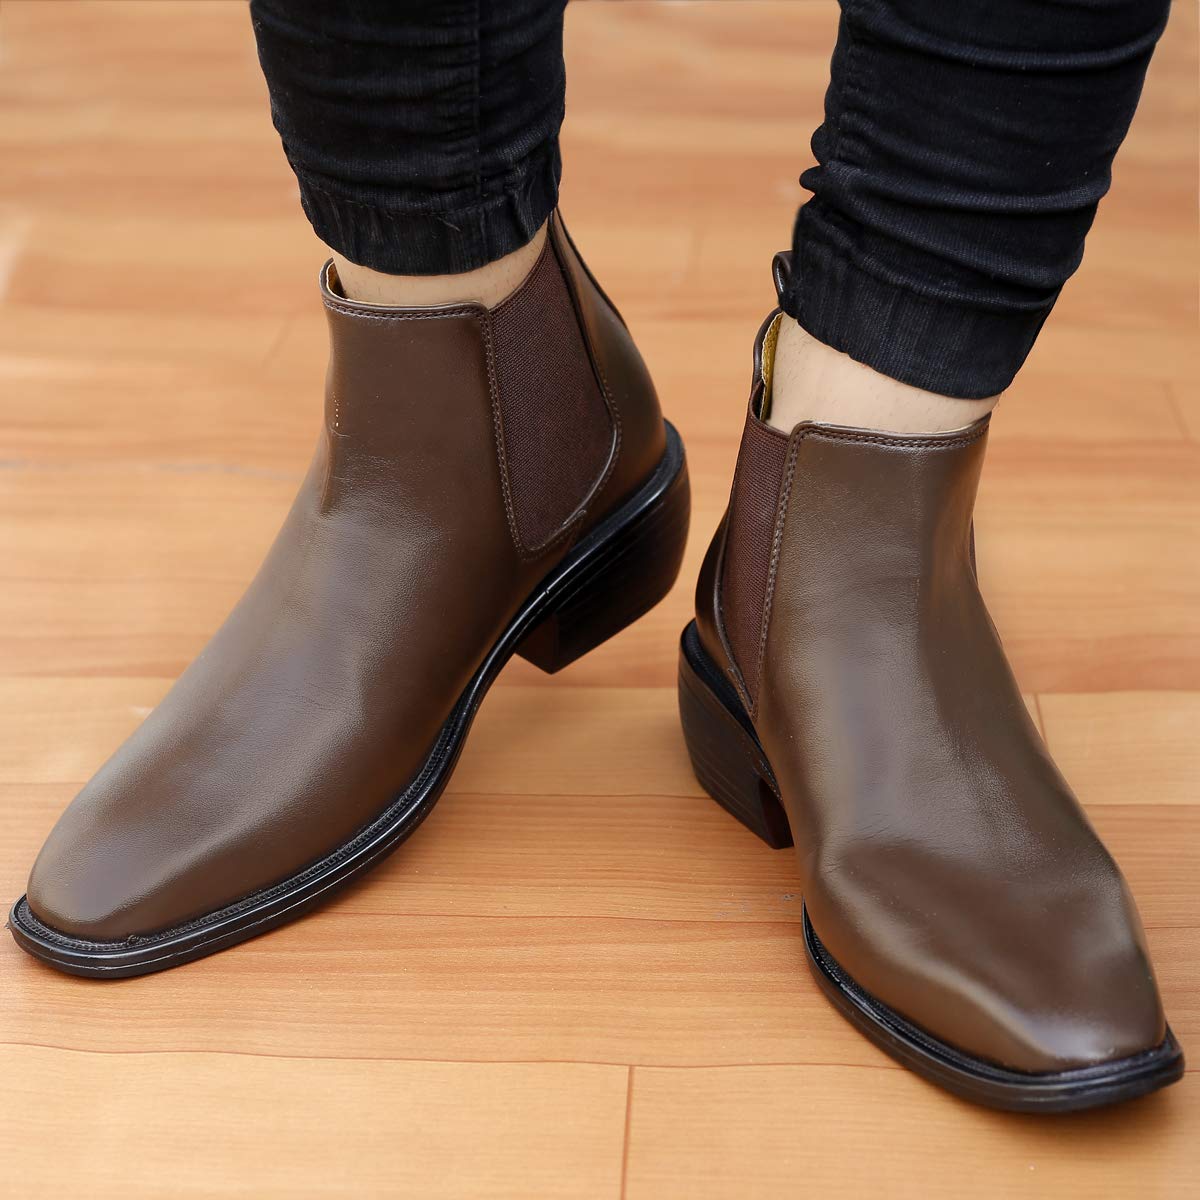 Classy Hight Ankle Height Increasing Brown Chelsea Boots For Men-JonasParamount